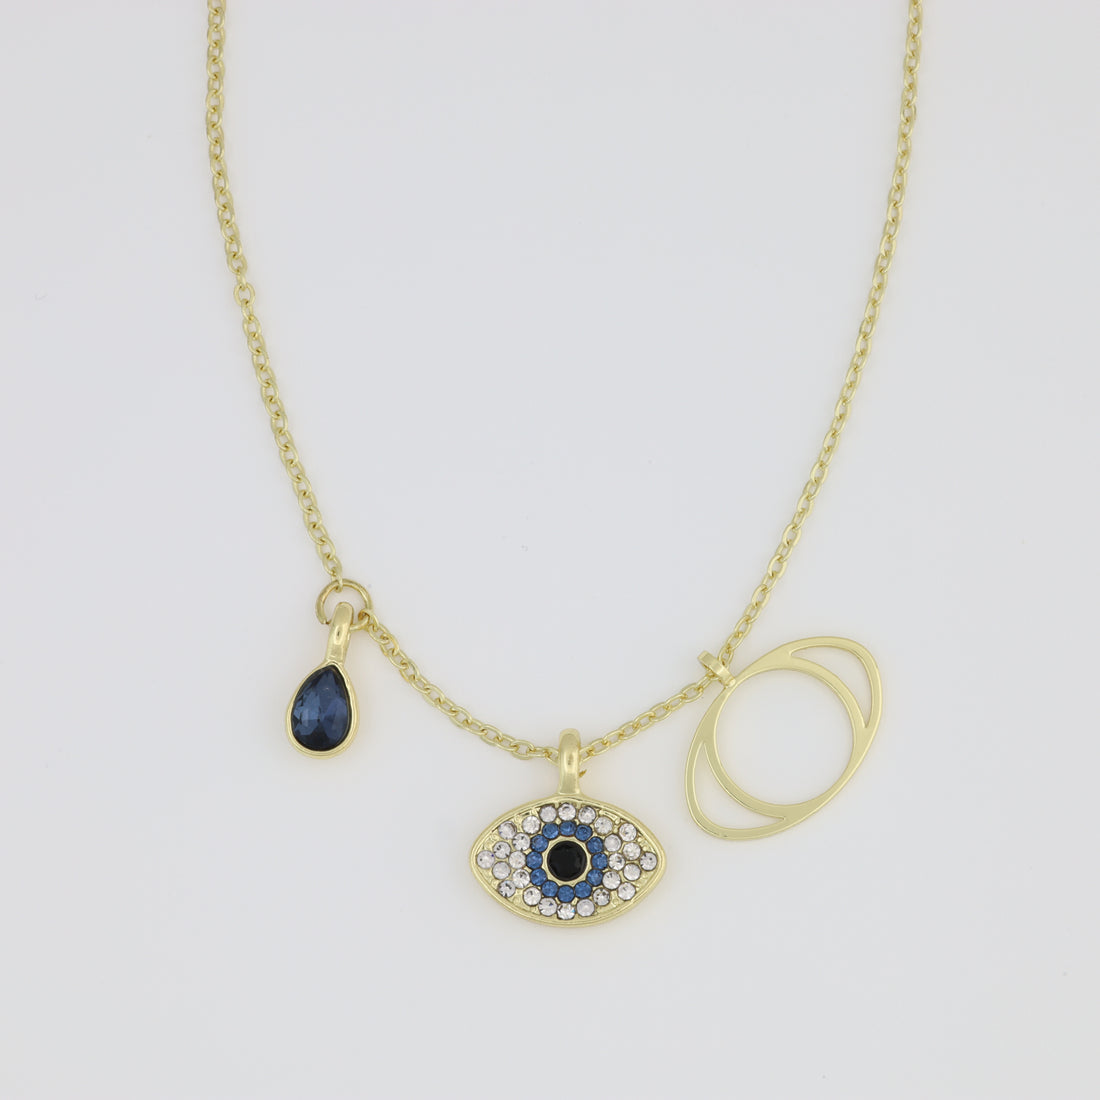 Necklace With Cable Link And Evel Eye Pendant